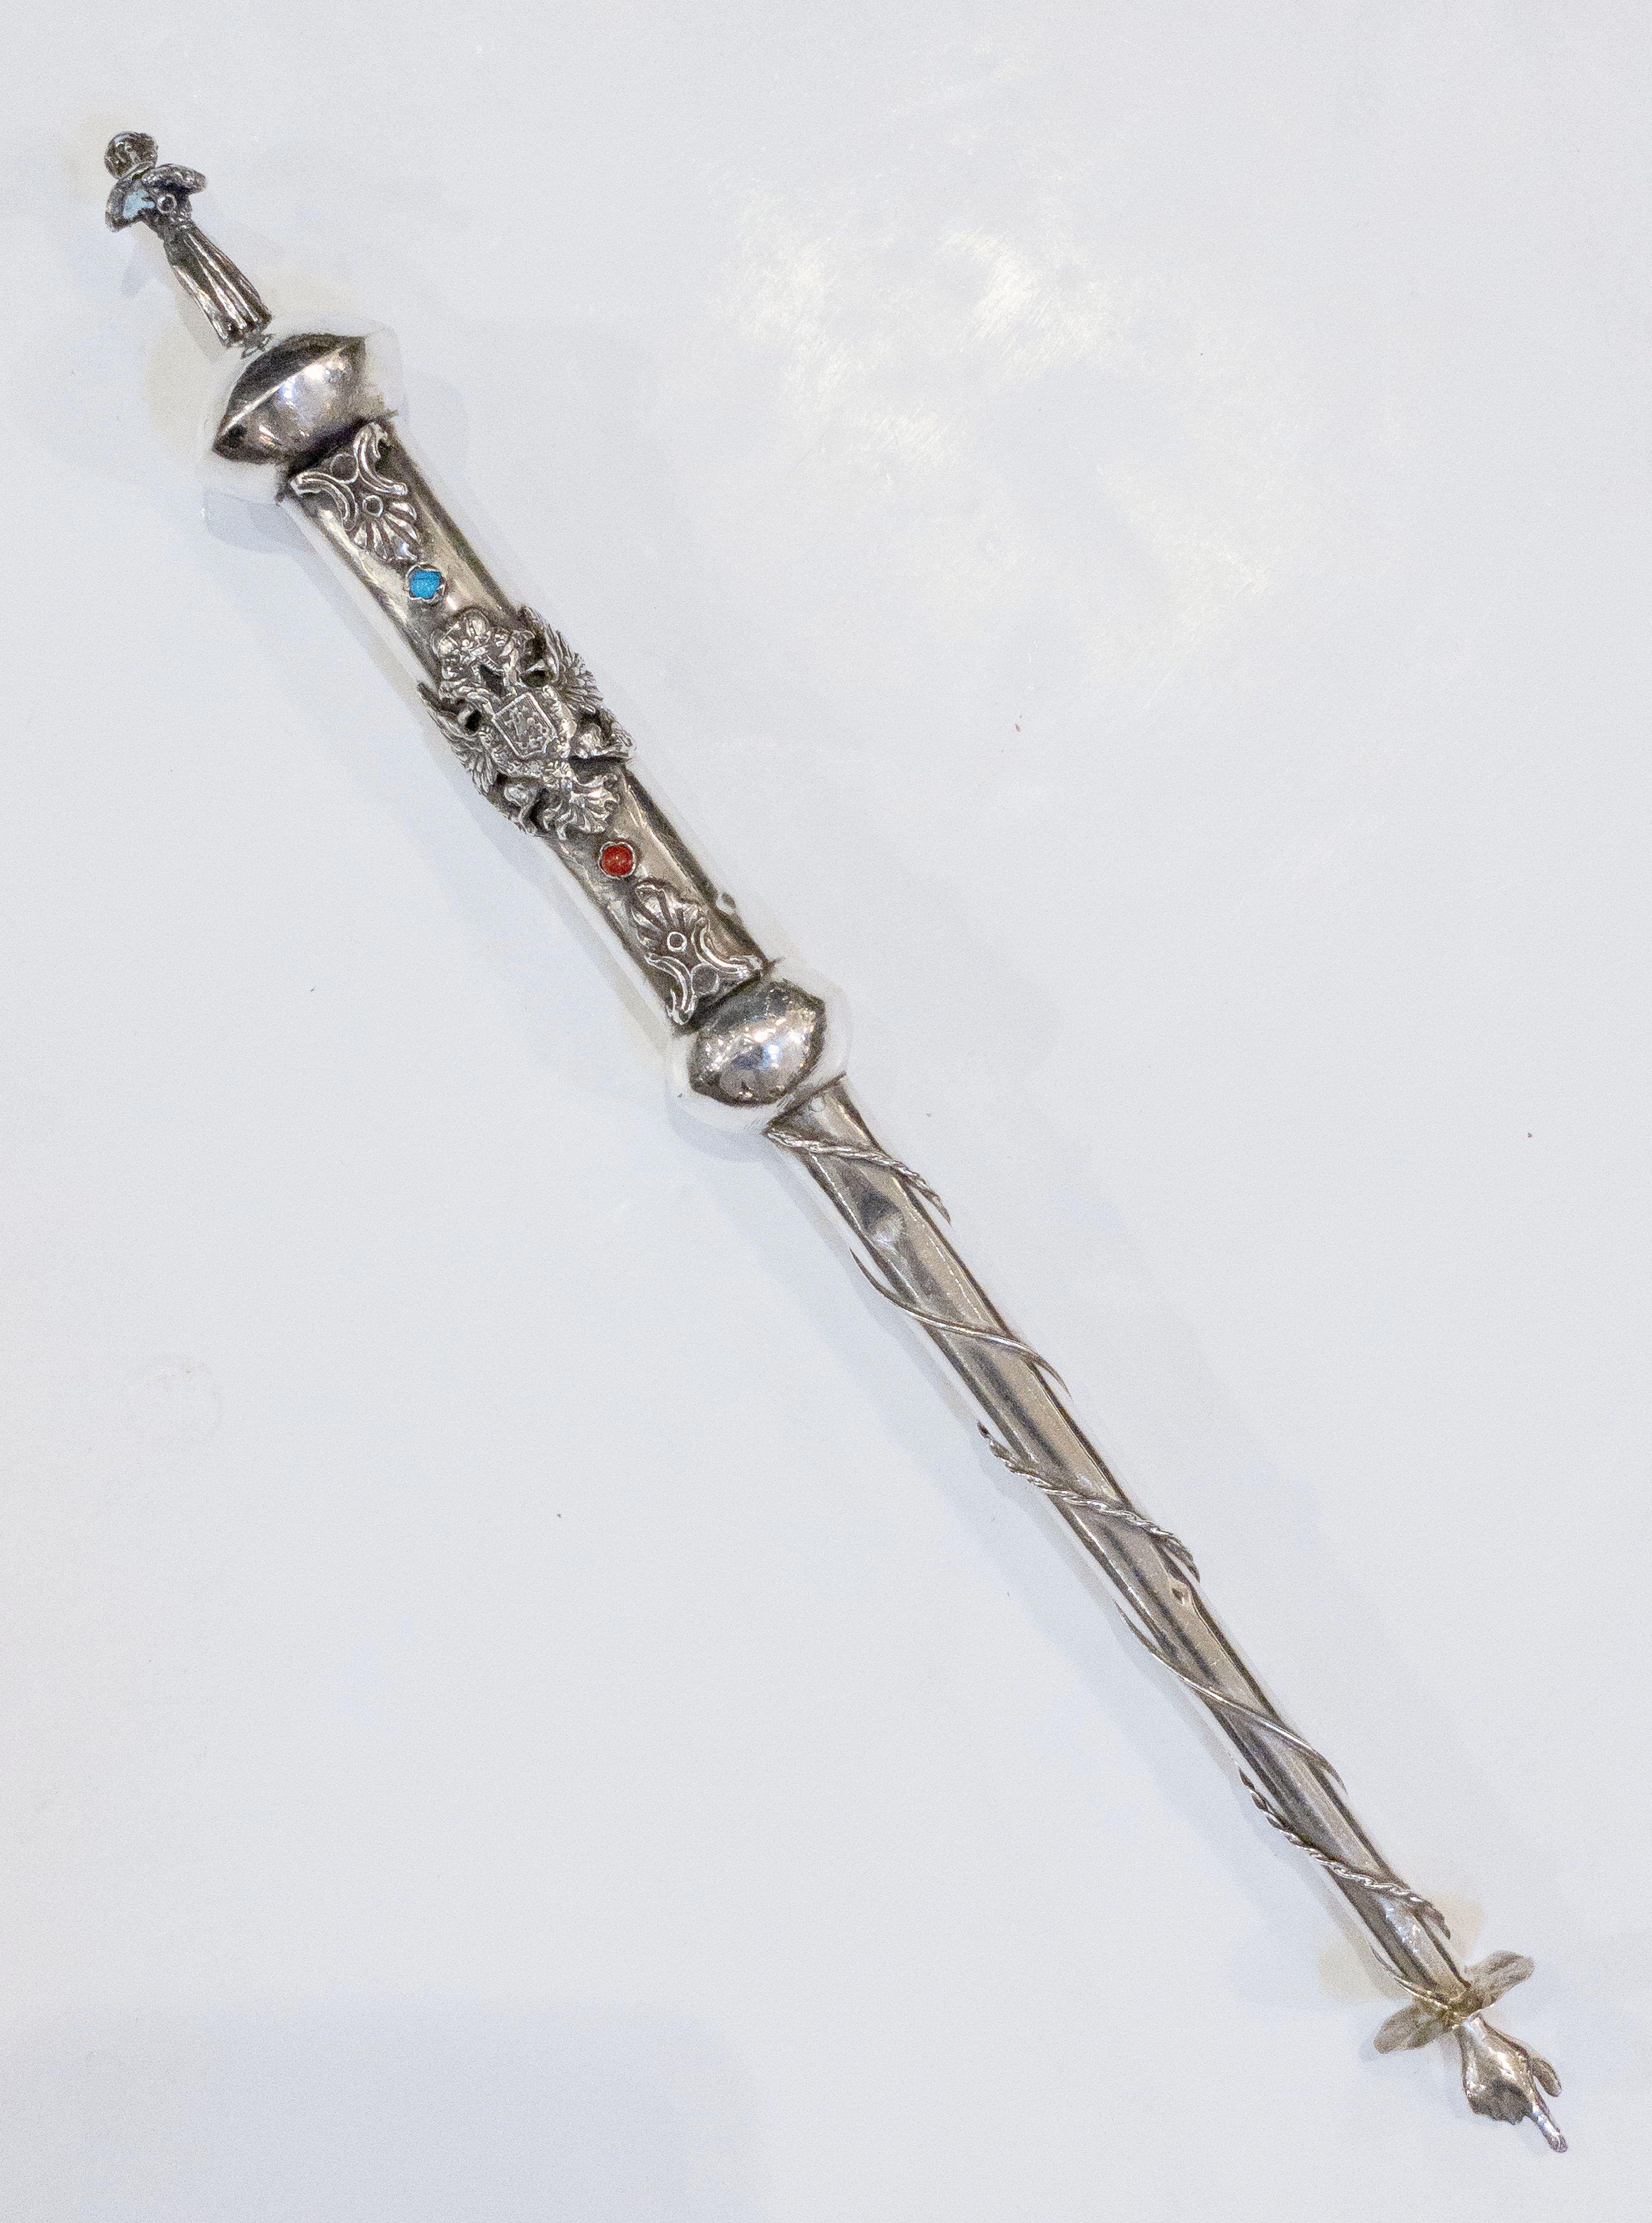 A fine Jewish yad or torah pointer of silver featuring a robed man playing a wind instrument on the handle end, with a traditional pointed finger hand on the other end. With decorative blue and red stones. A handsome find for the Judaica